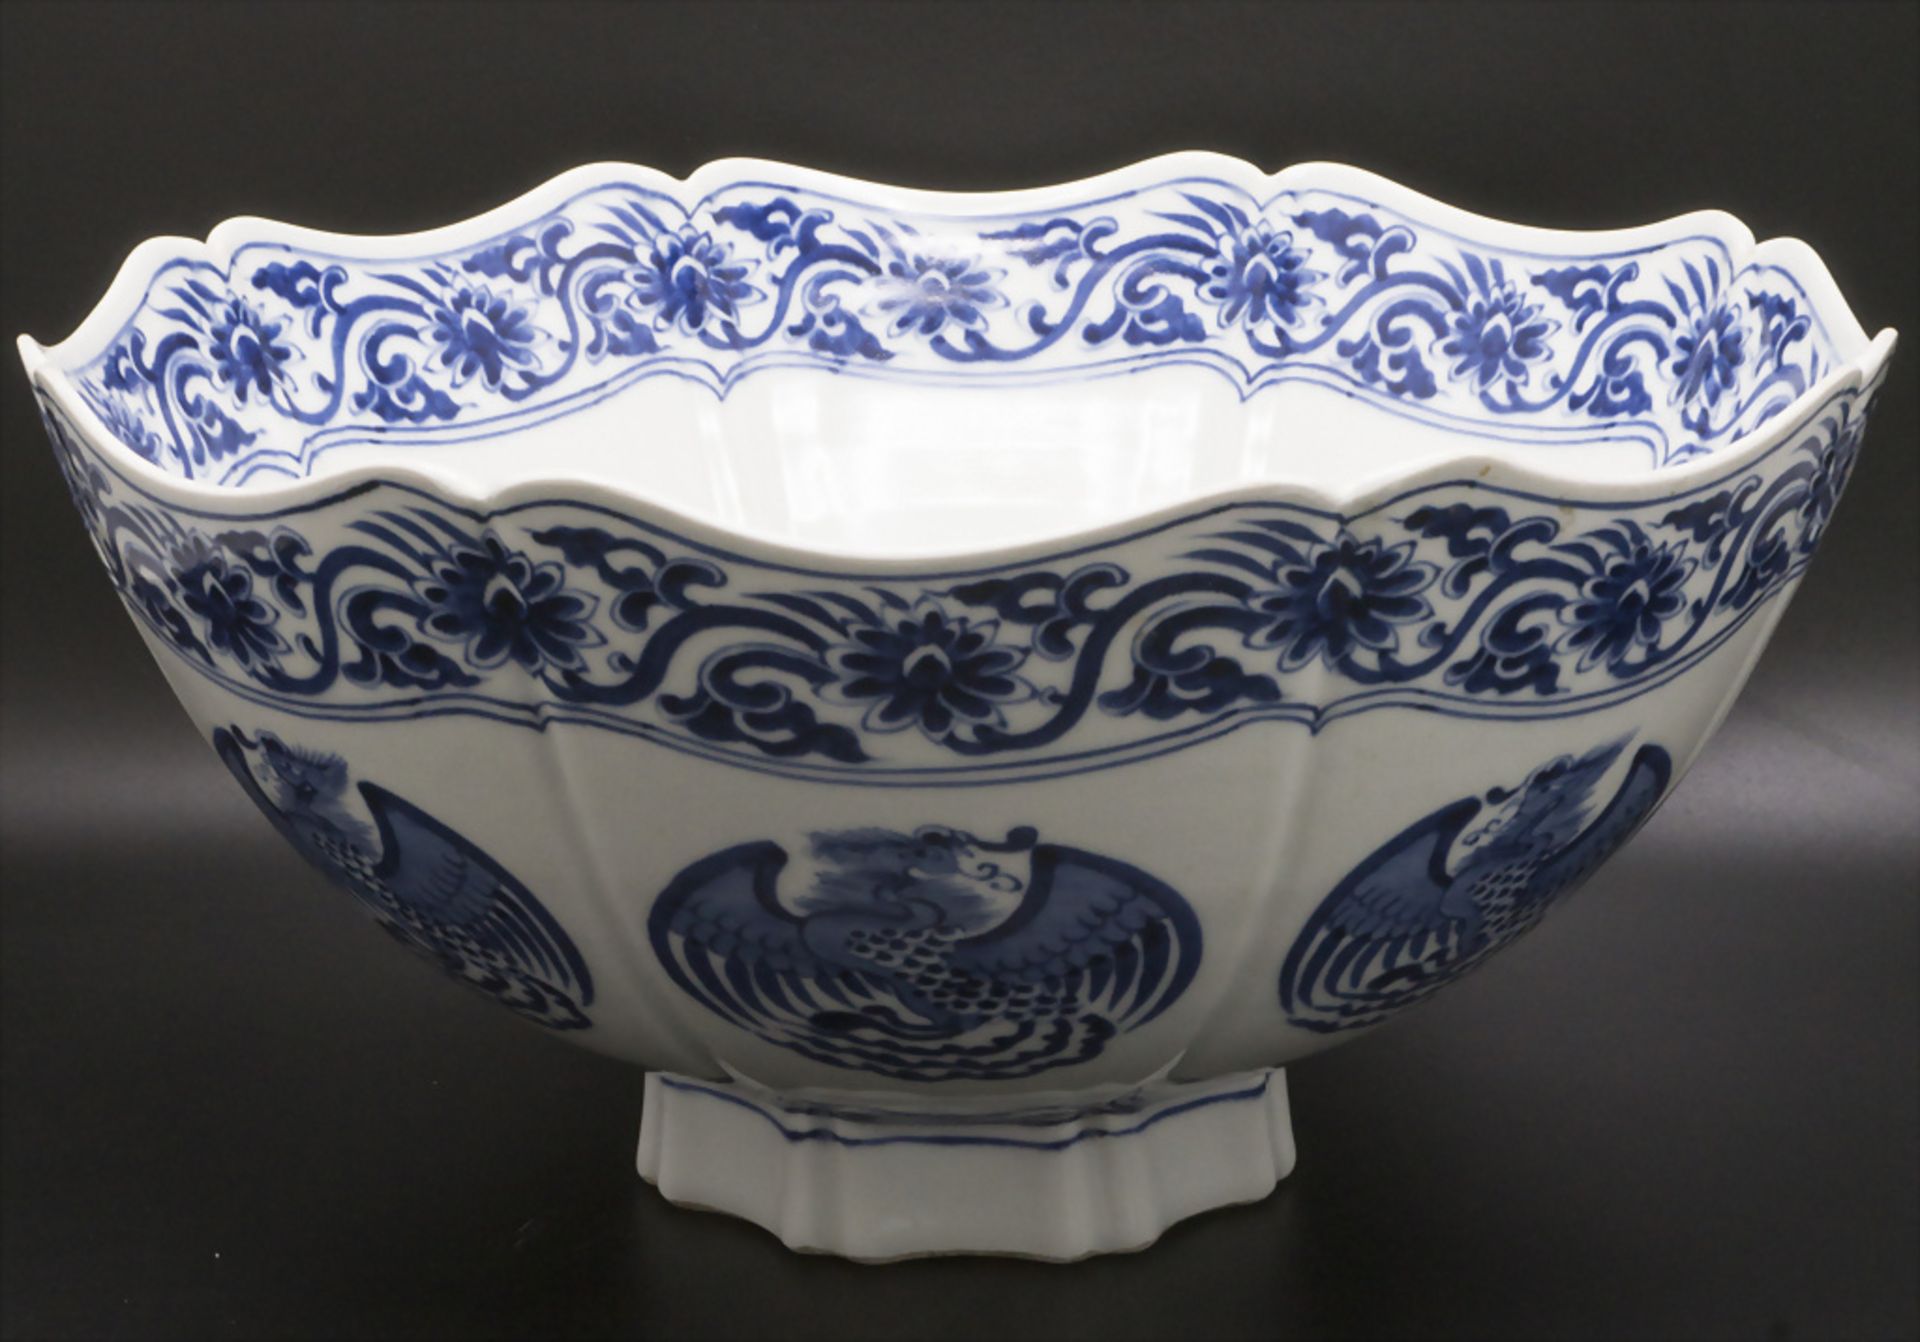 Große Schale / A large porcelain bowl, China, Qing-Dynastie (1644-1911), wohl 19. Jh.